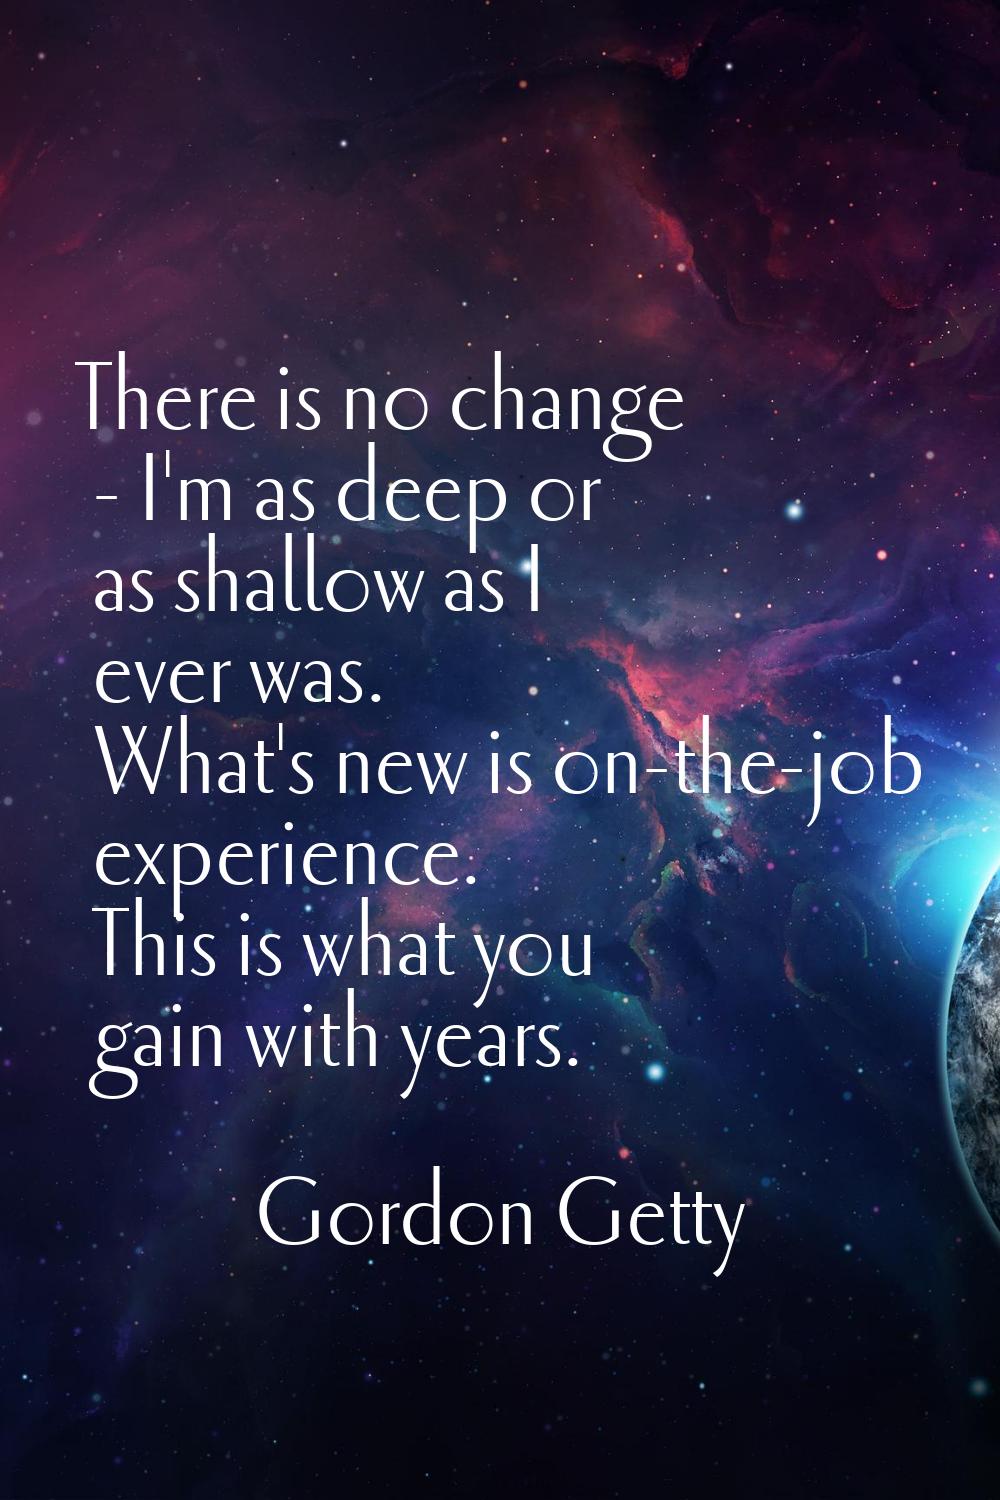 There is no change - I'm as deep or as shallow as I ever was. What's new is on-the-job experience. 